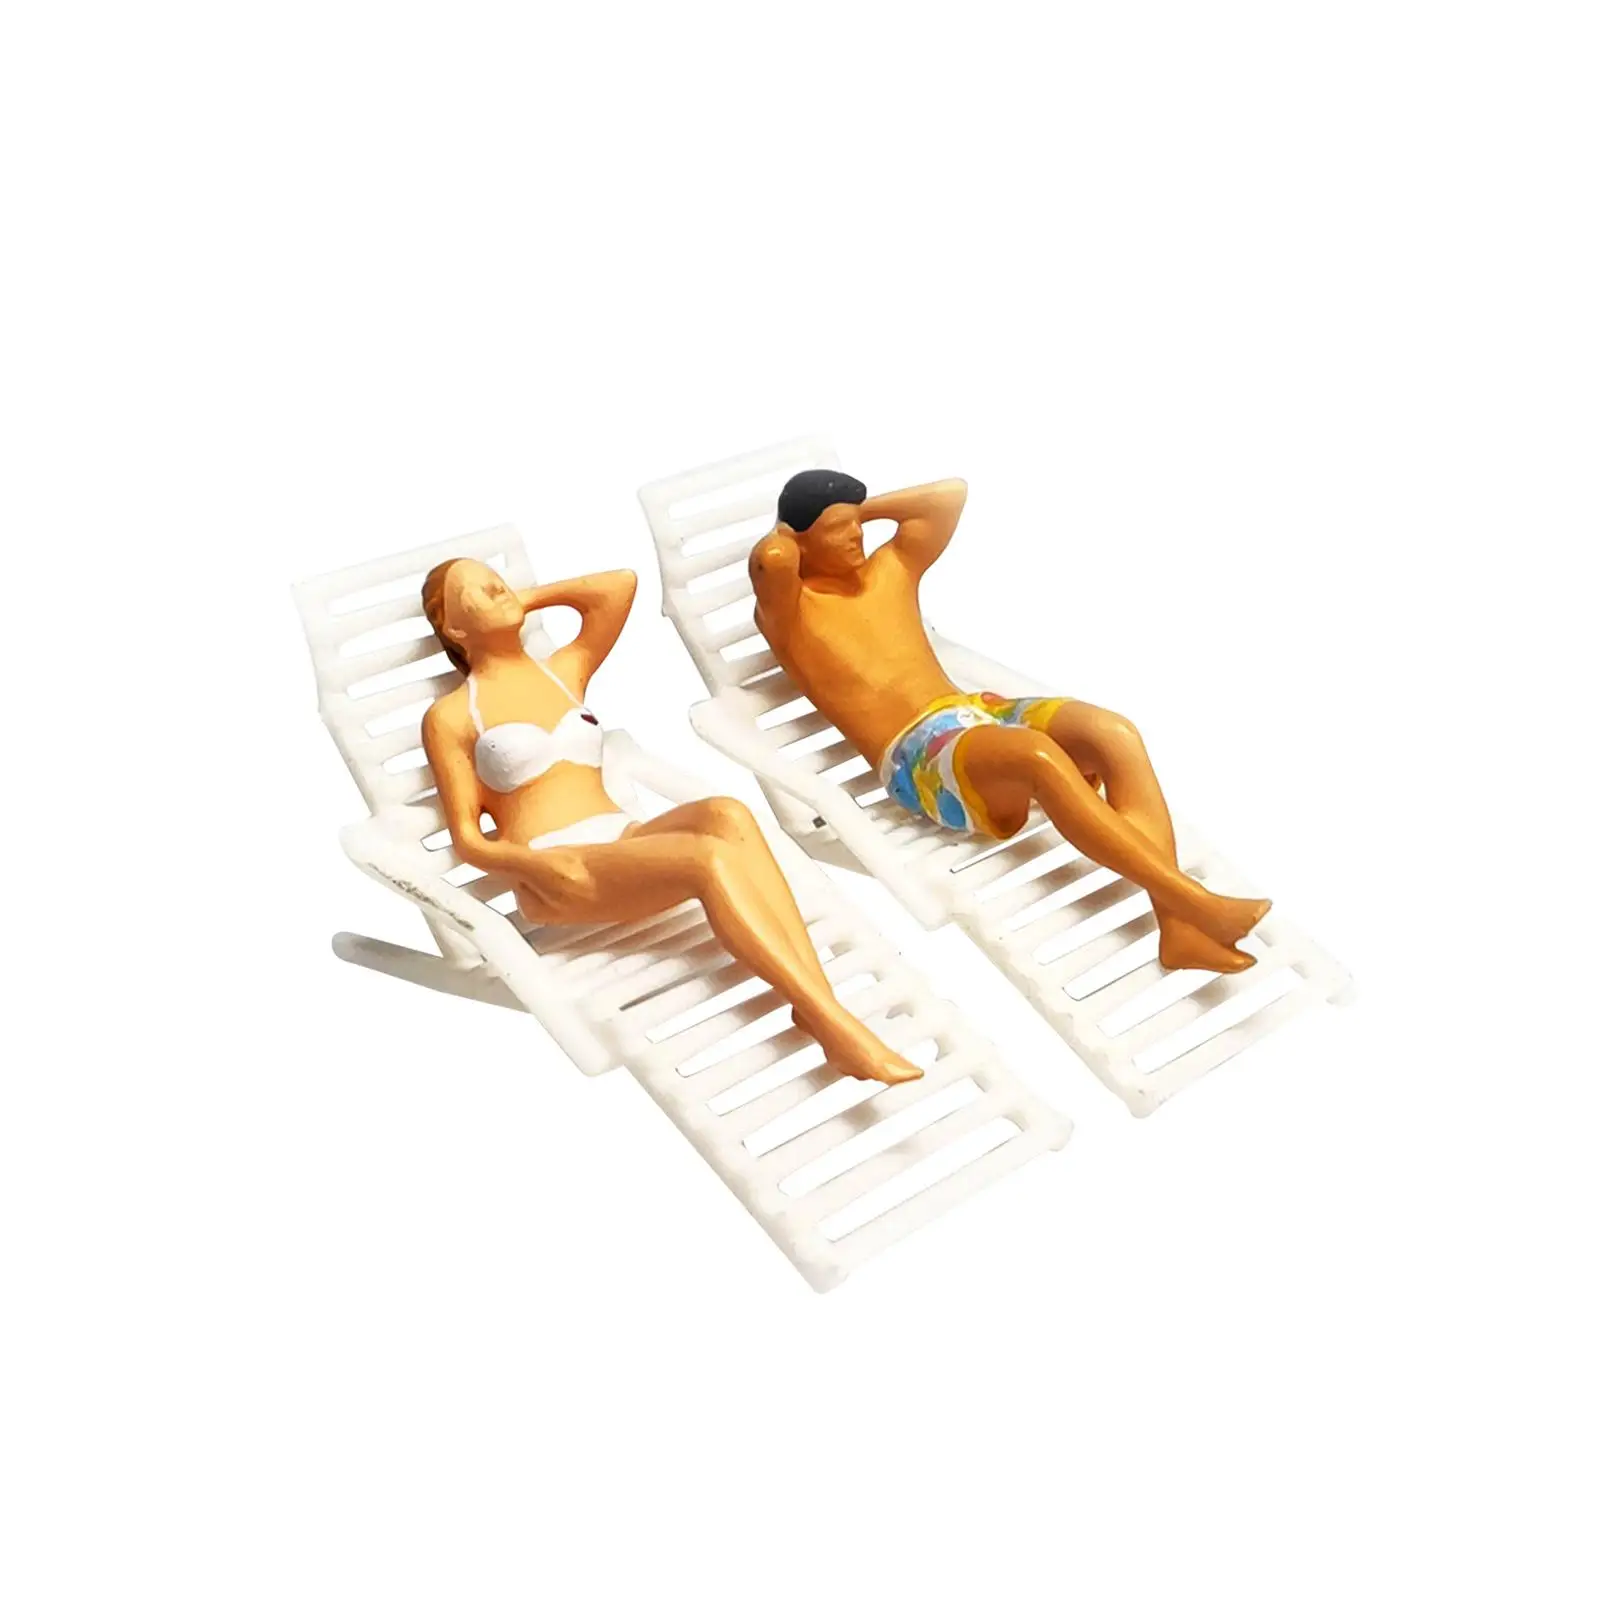 Resin 1/64 Scale People Figurines Set Miniature People Model Tiny People Deck Chair Model for Miniature Scene Diorama Layout